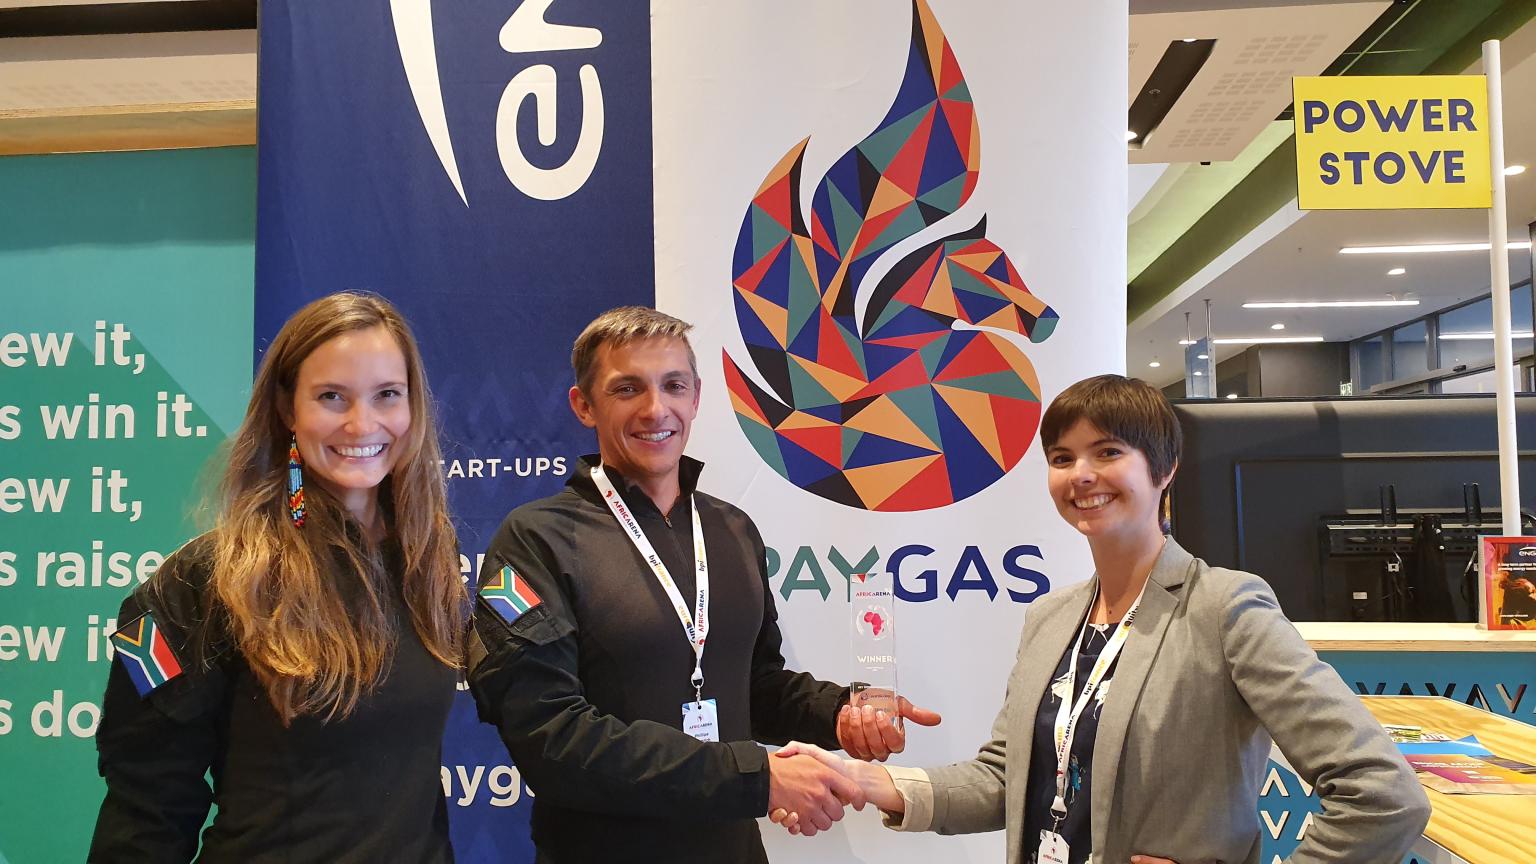 PayGas, an inclusive and eco-responsible clean cooking solution